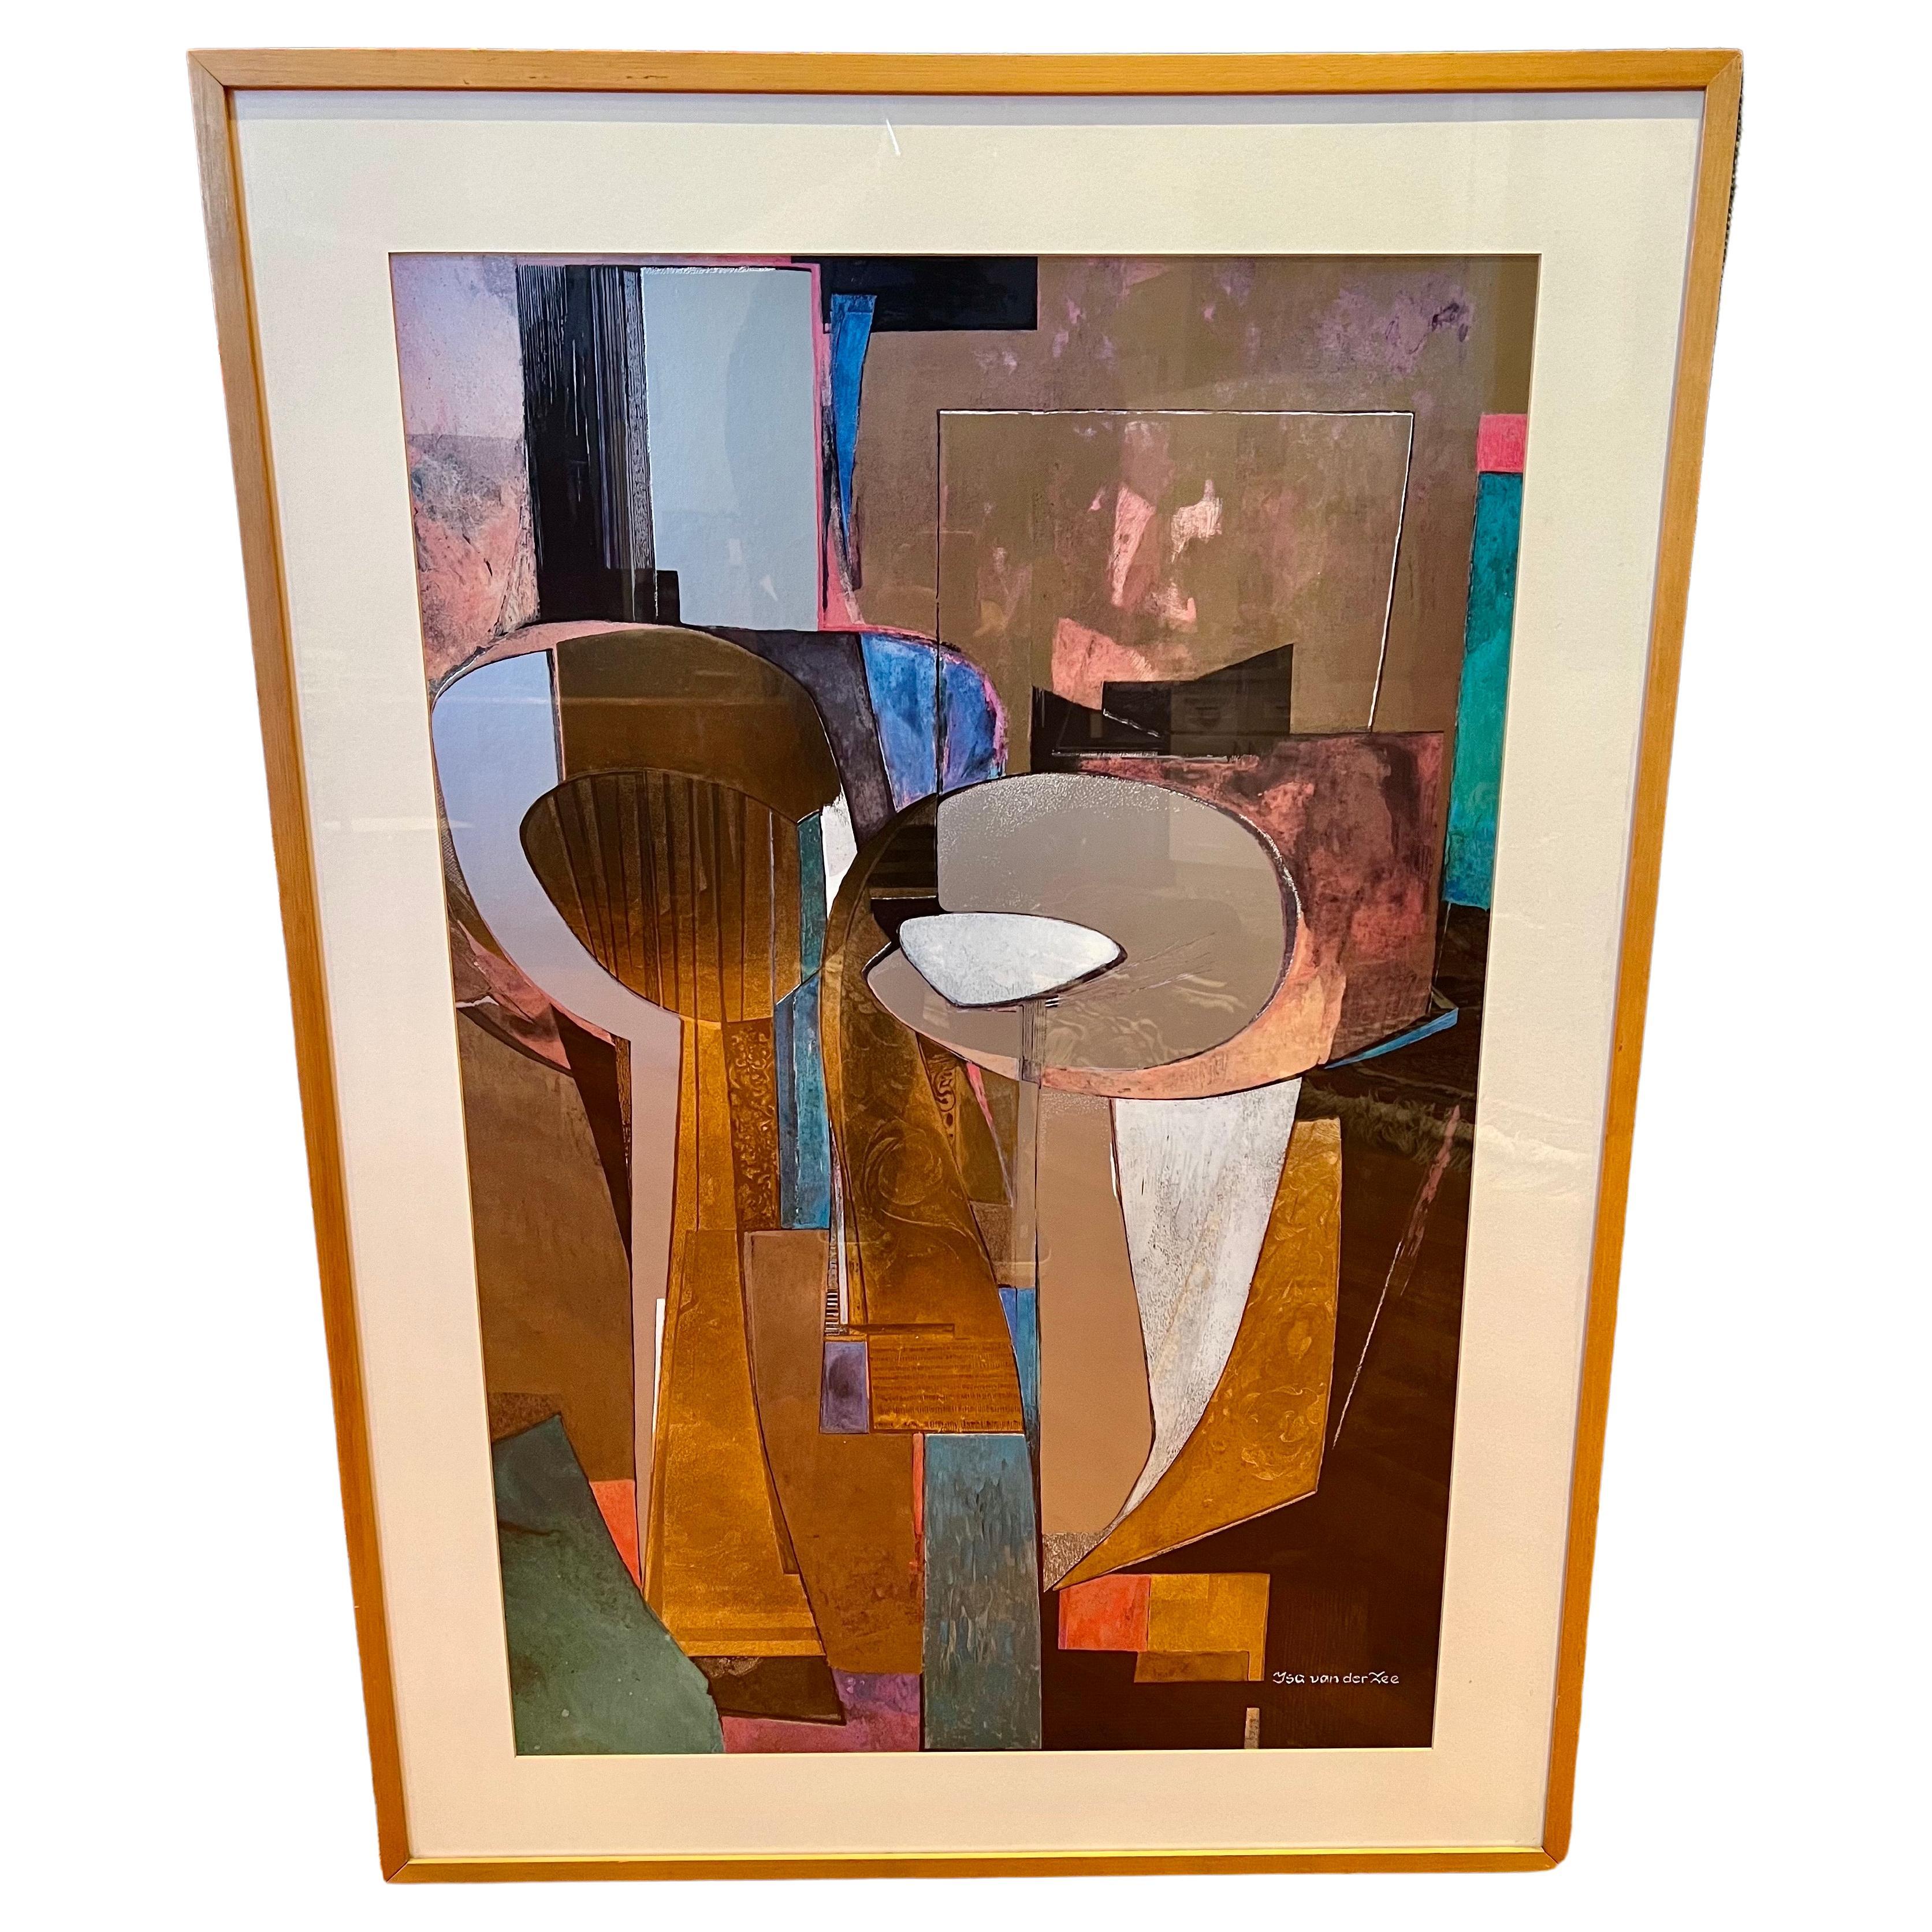 Isa VAN DER ZEE is an artist born in 1928. Artprice lists 5 of the artist's works for sale at public auction, mainly in the Print-Multiple category. listed artist with auction results nicely framed lithograph solid maple frame with plexy nice